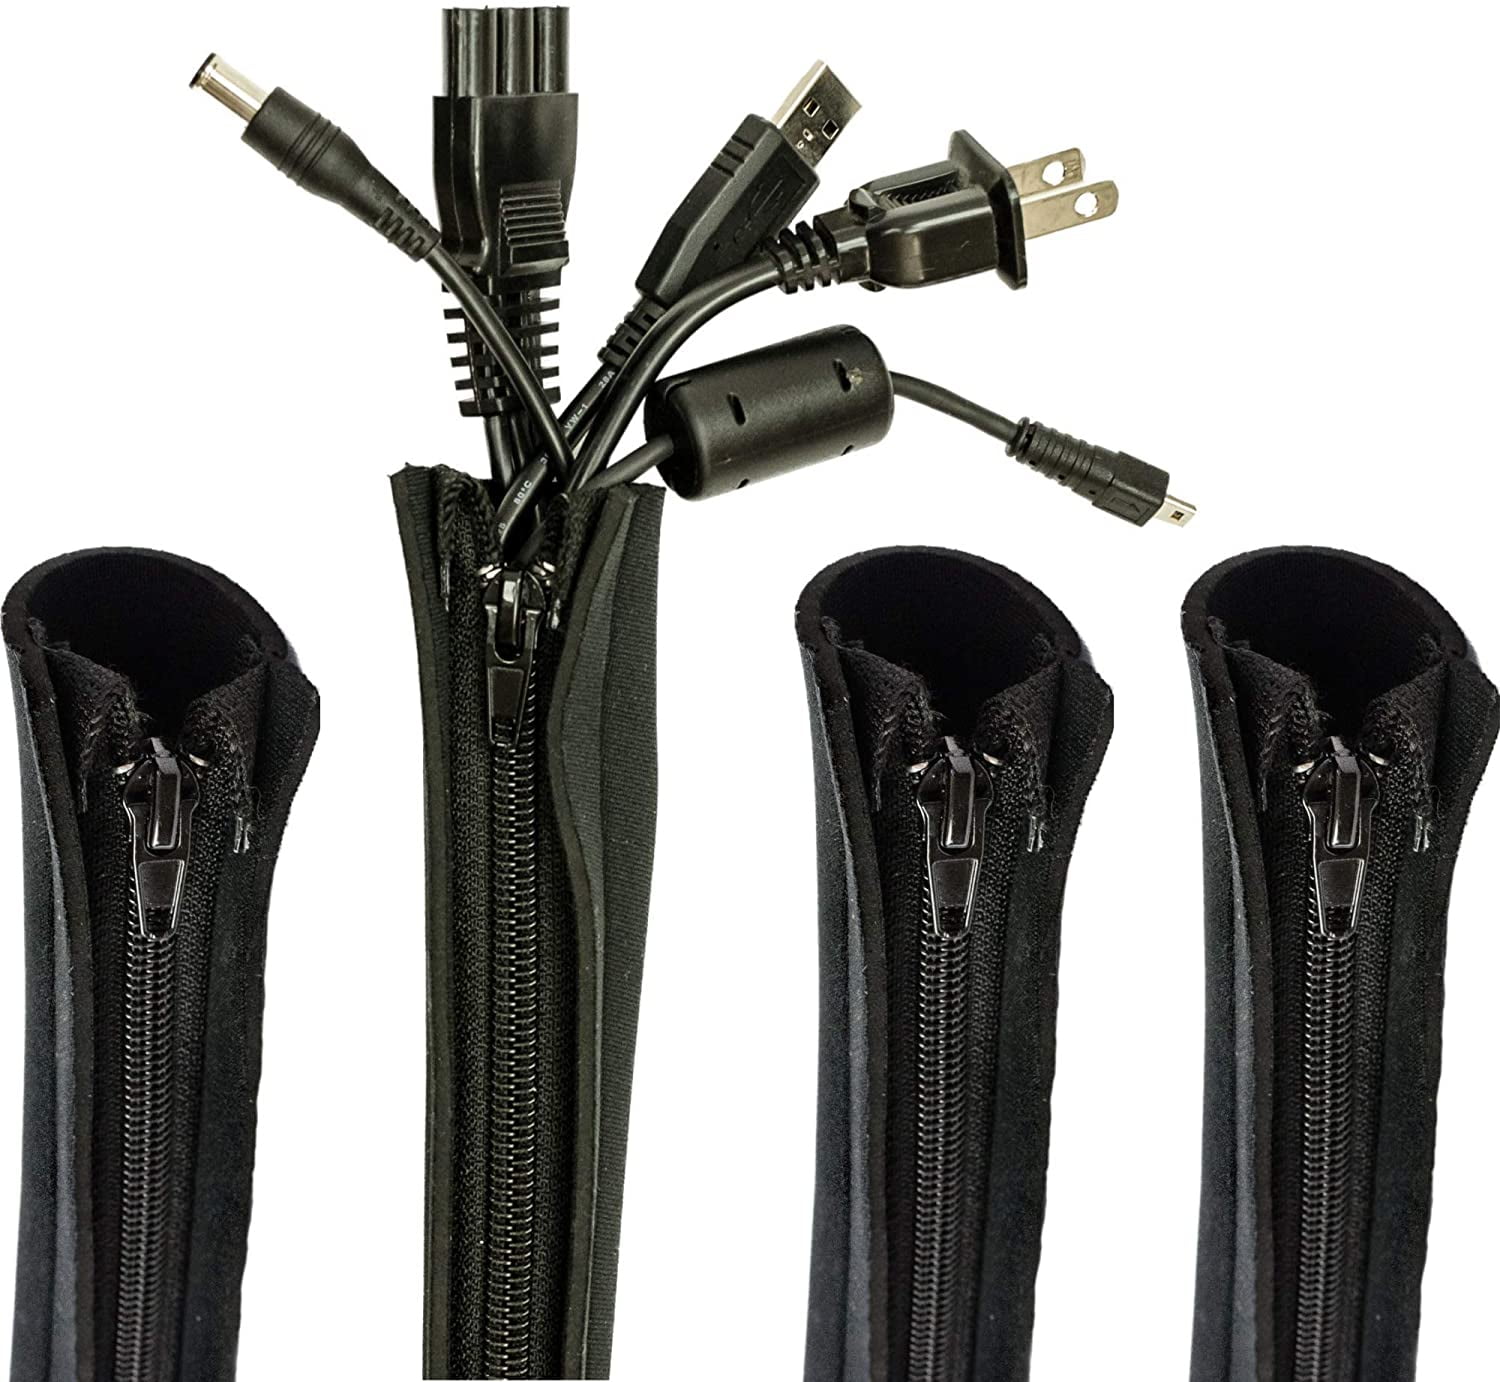 Cable Management Sleeve, 4 Pack, 20 Inch Cord Organizer System with Zipper  for TV Computer Office Home Entertainment, Flexible Cable Sleeve Wrap Cover  Wire Hider System - Black 